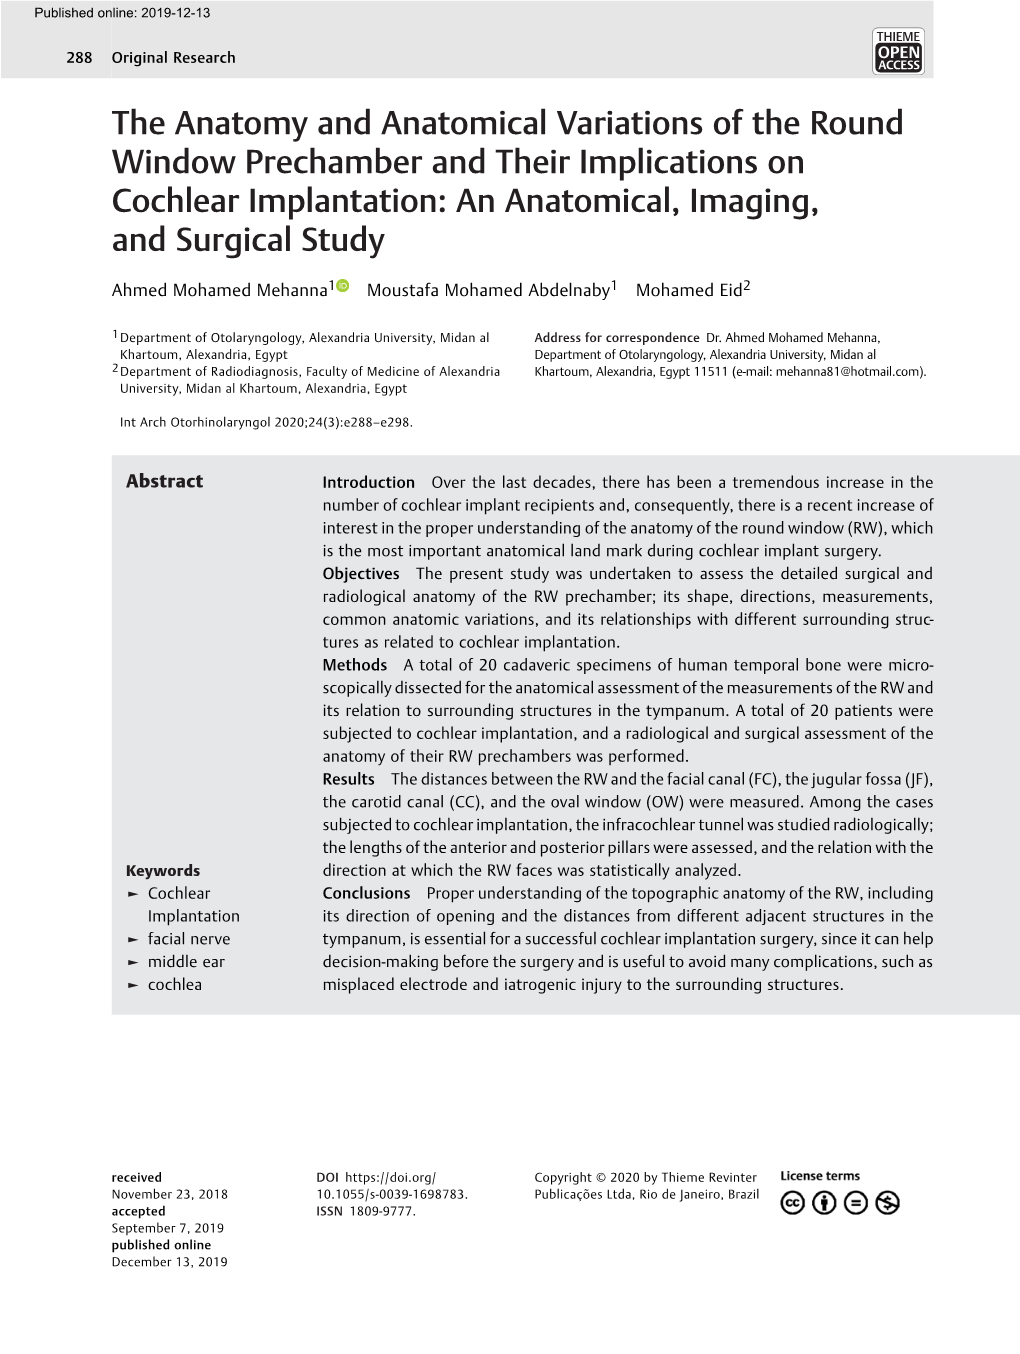 The Anatomy and Anatomical Variations of the Round Window Prechamber and Their Implications on Cochlear Implantation: an Anatomical, Imaging, and Surgical Study